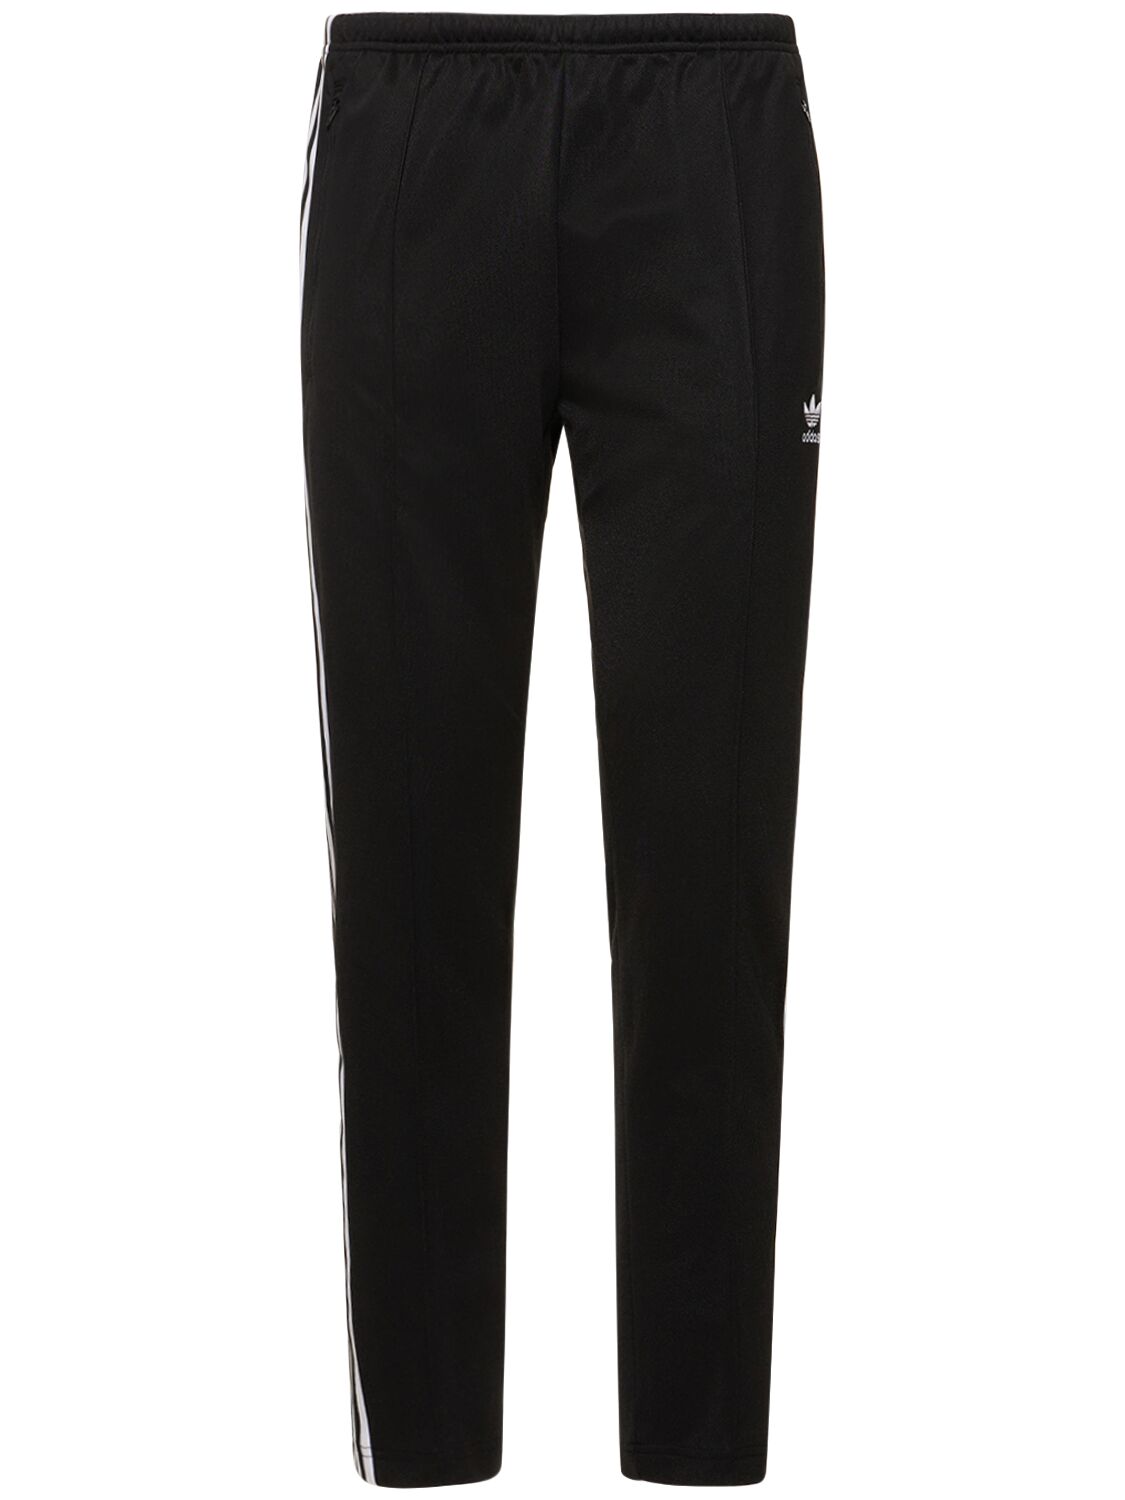 Image of Beckenbauer Cotton Blend Track Pants